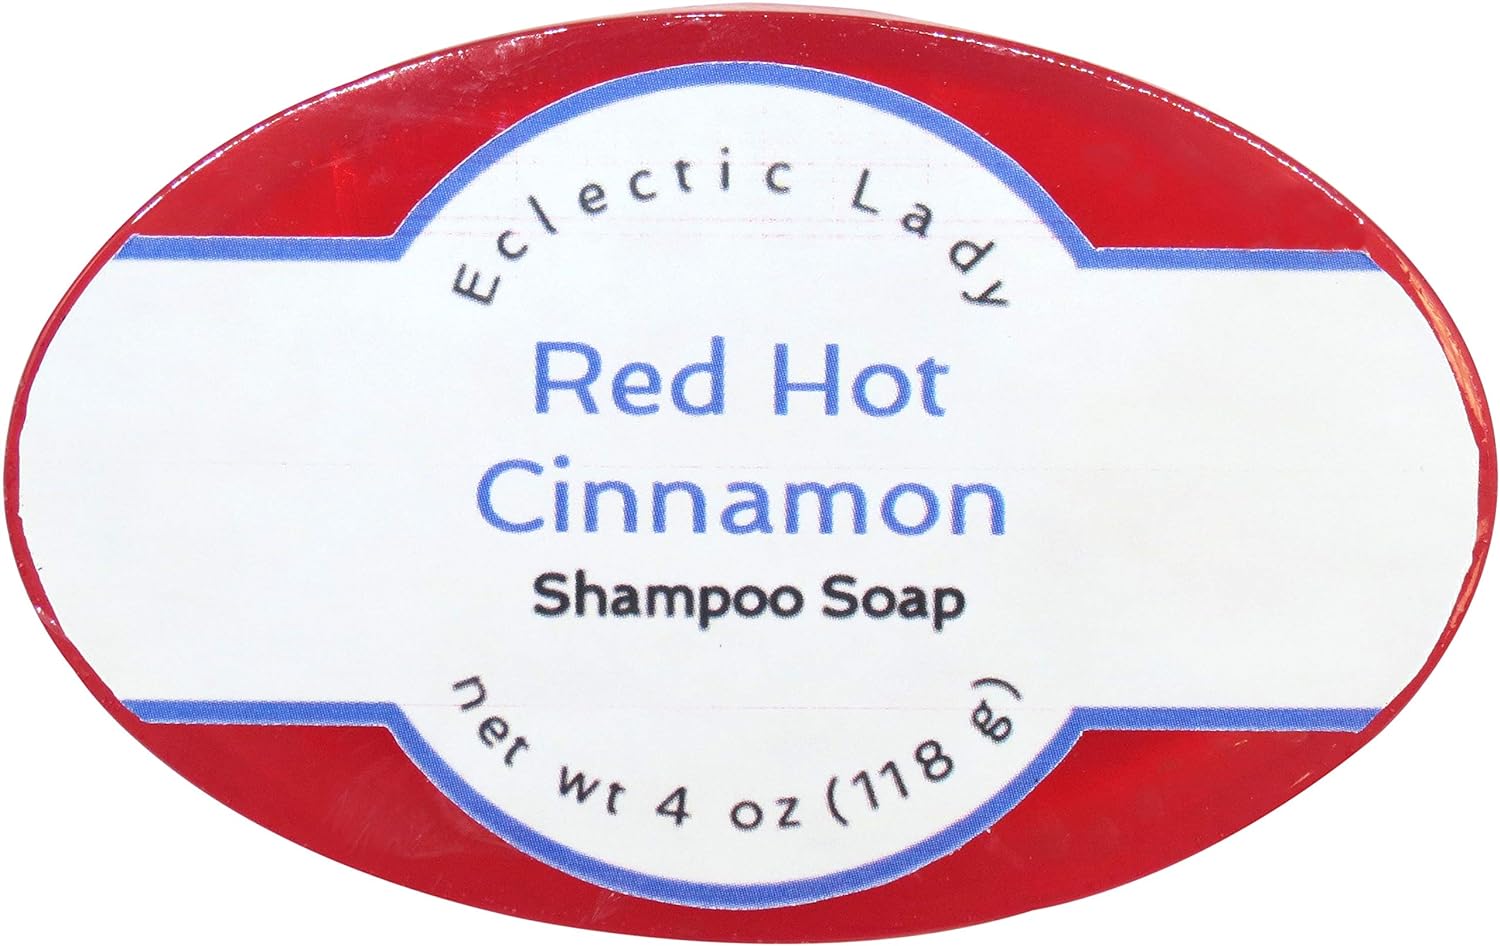 Eclectic Lady Red Hot Cinnamon Shampoo Soap Bar with Pure Argan Oil, Silk Protein, Honey Protein and Extracts of Calendula ower, Aloe, Carrageenan, Sunower - 4  Bar